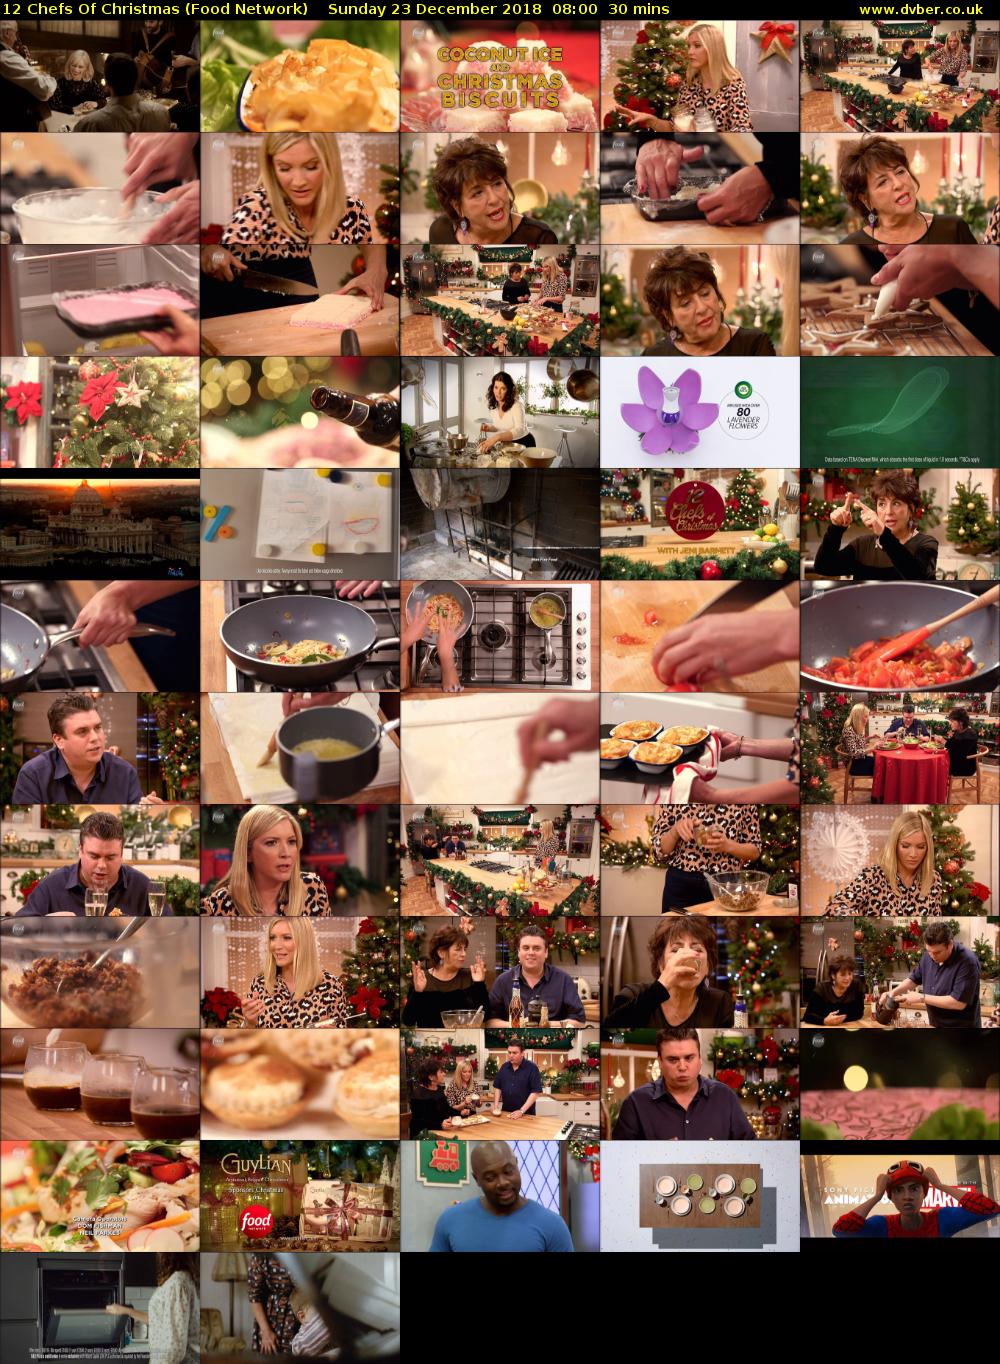 12 Chefs Of Christmas (Food Network) Sunday 23 December 2018 08:00 - 08:30